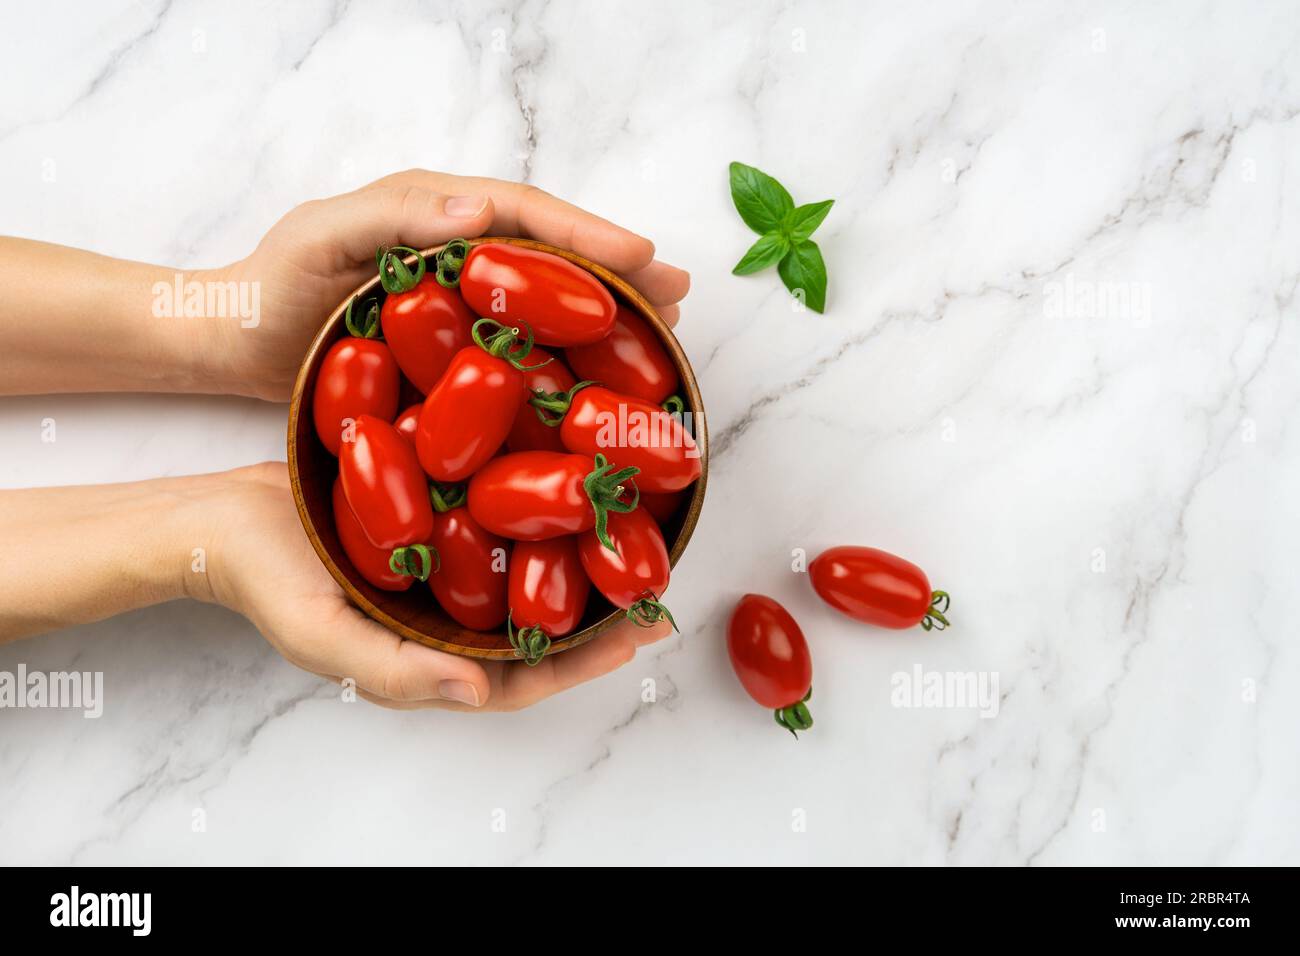 Bowl of fresh Ornela cherry tomatoes in a woman hands over marble background. Female hands hold bowl of red ripe small tomatoes. Organic vegetables. Stock Photo